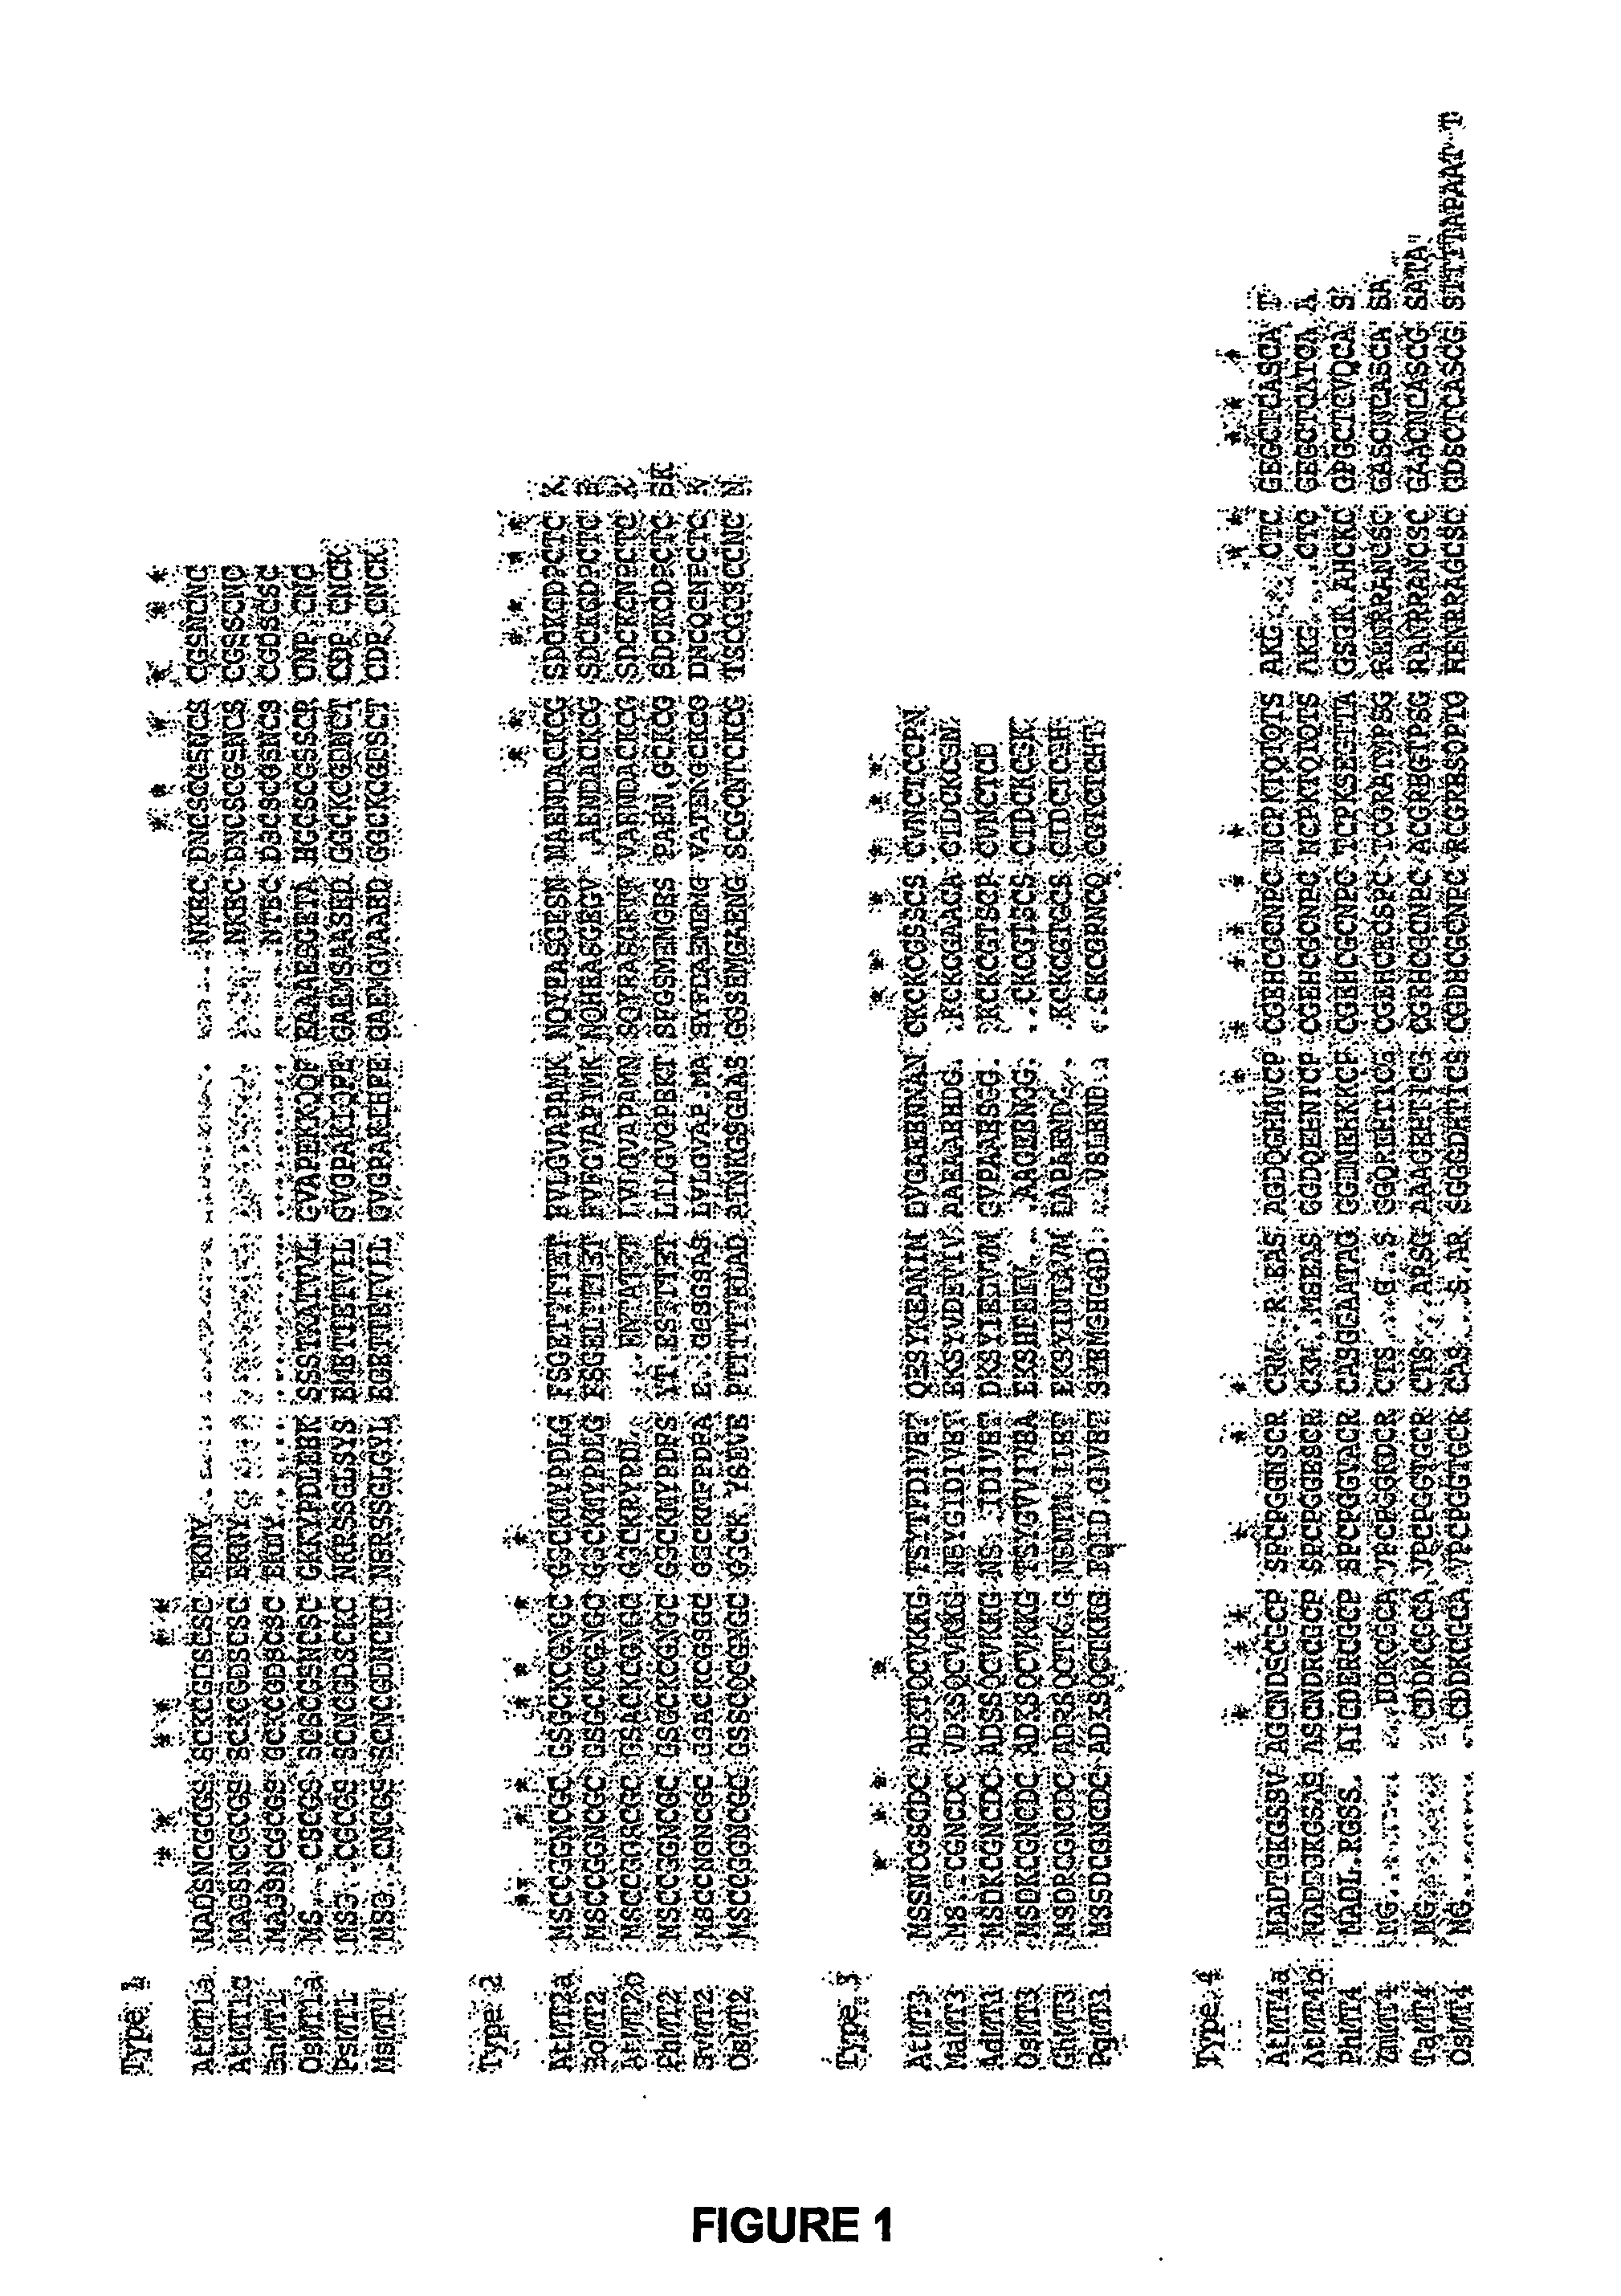 Plants having modified growth characteristics and method for making the same